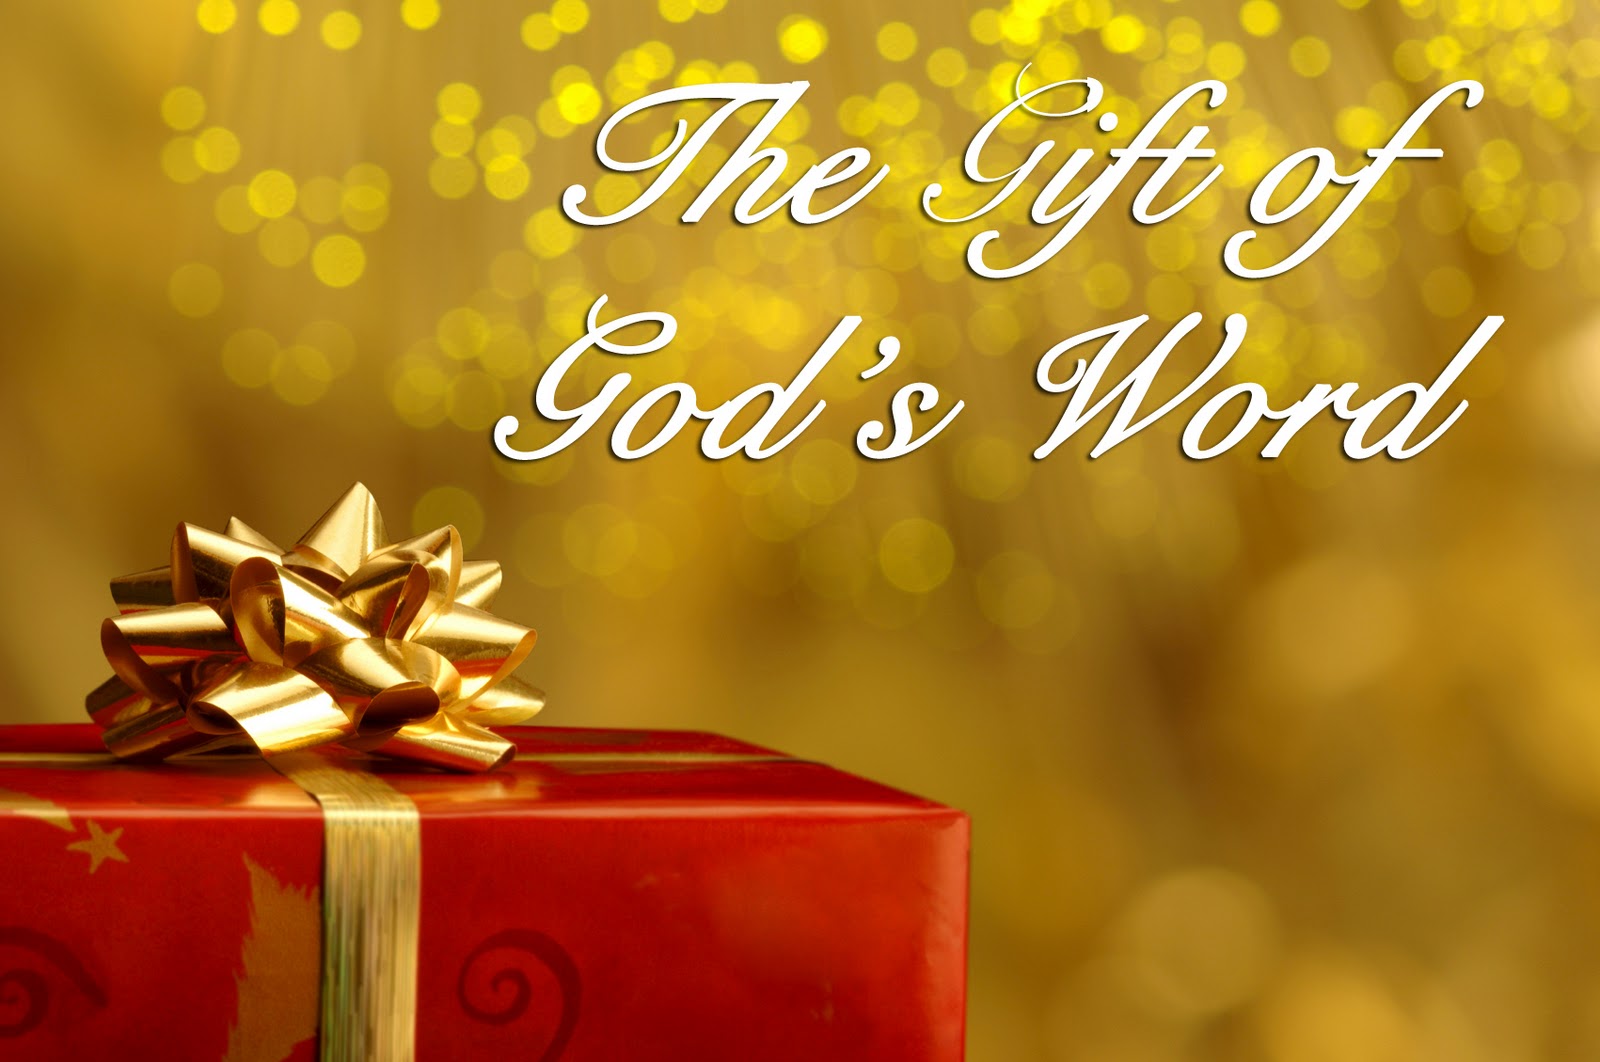 andy at faith: The Gift of God's Word